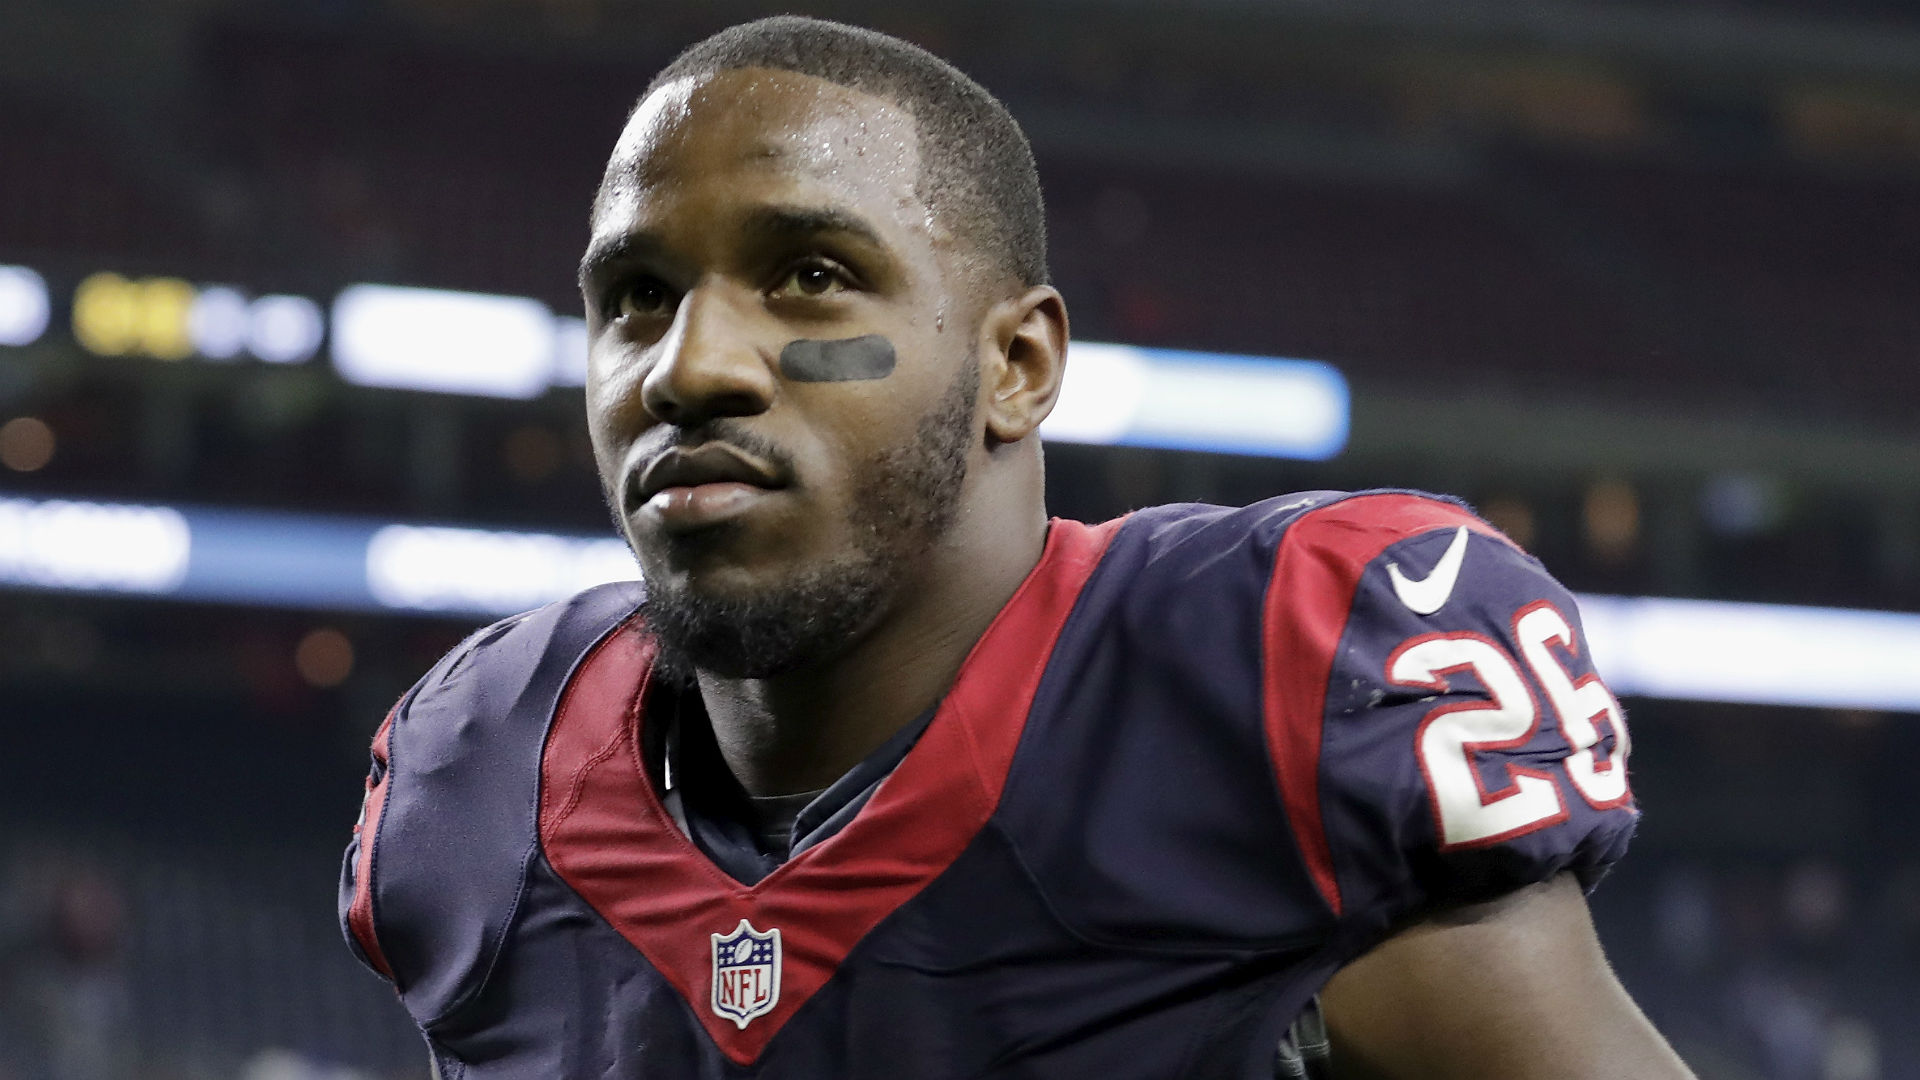 Lamar Miller injury update: Texans star (knee) out for season with torn ACL, report says